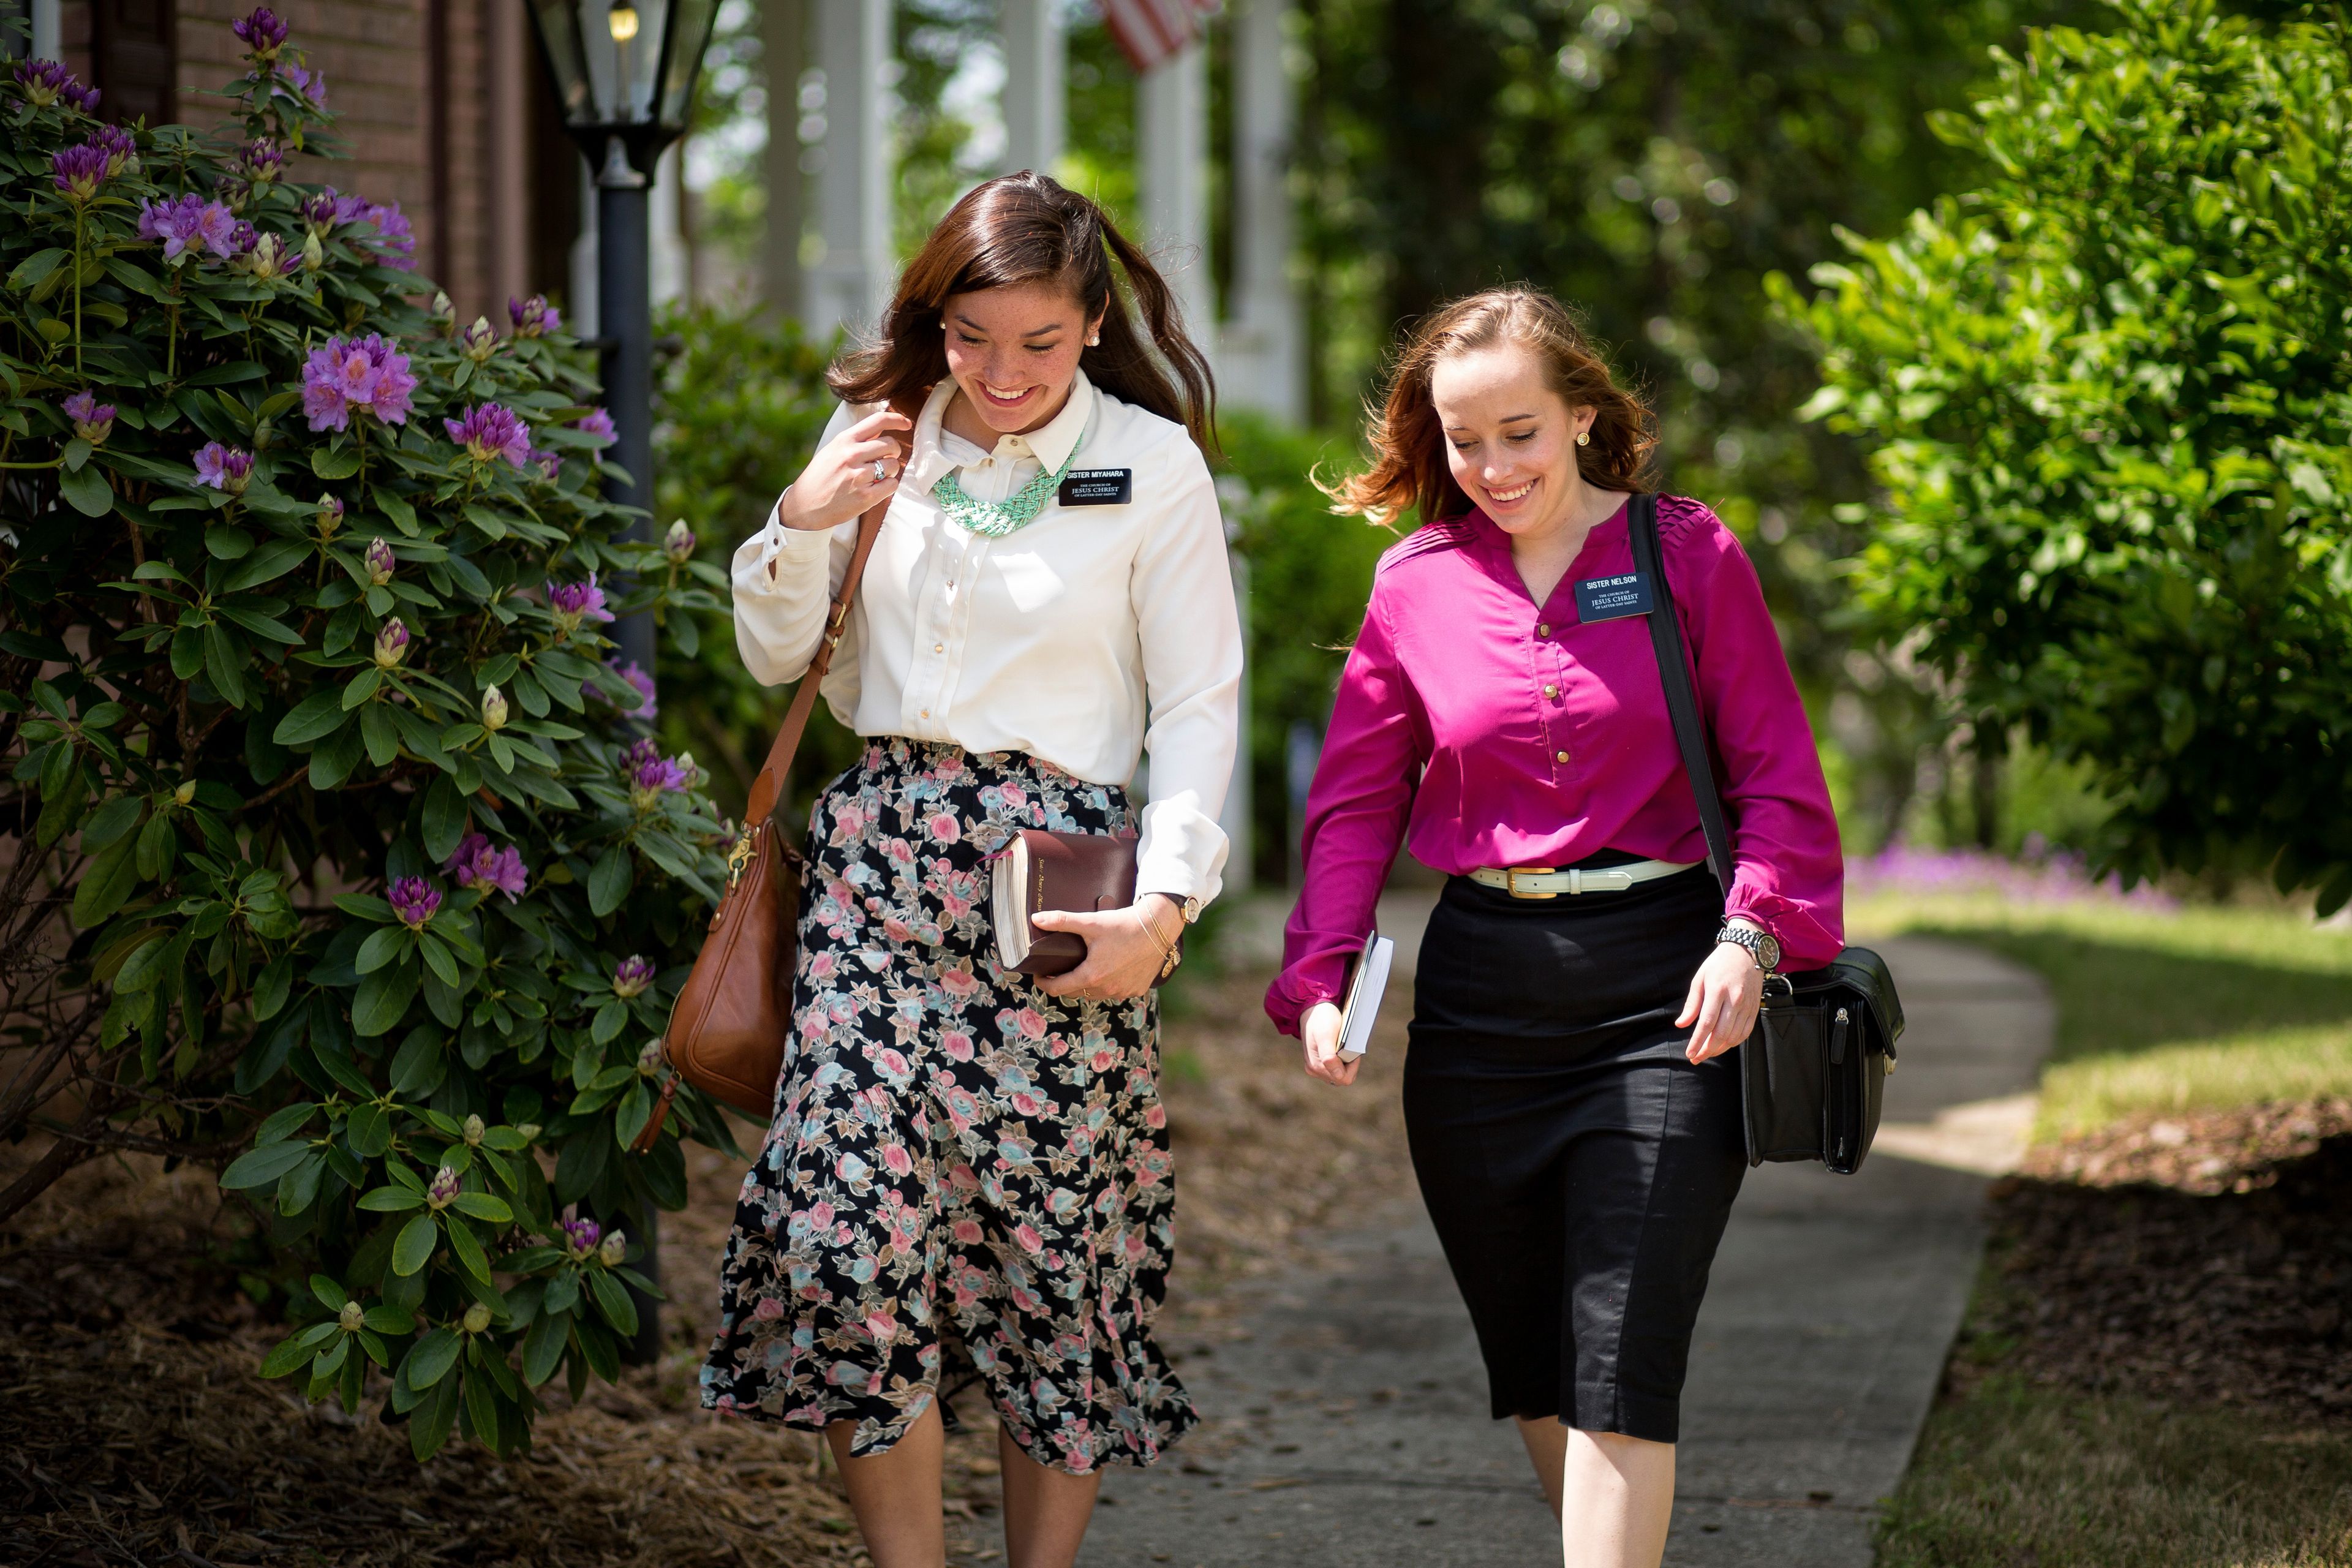 Two sister missionaries carrying bags and scriptures while walking down a path.